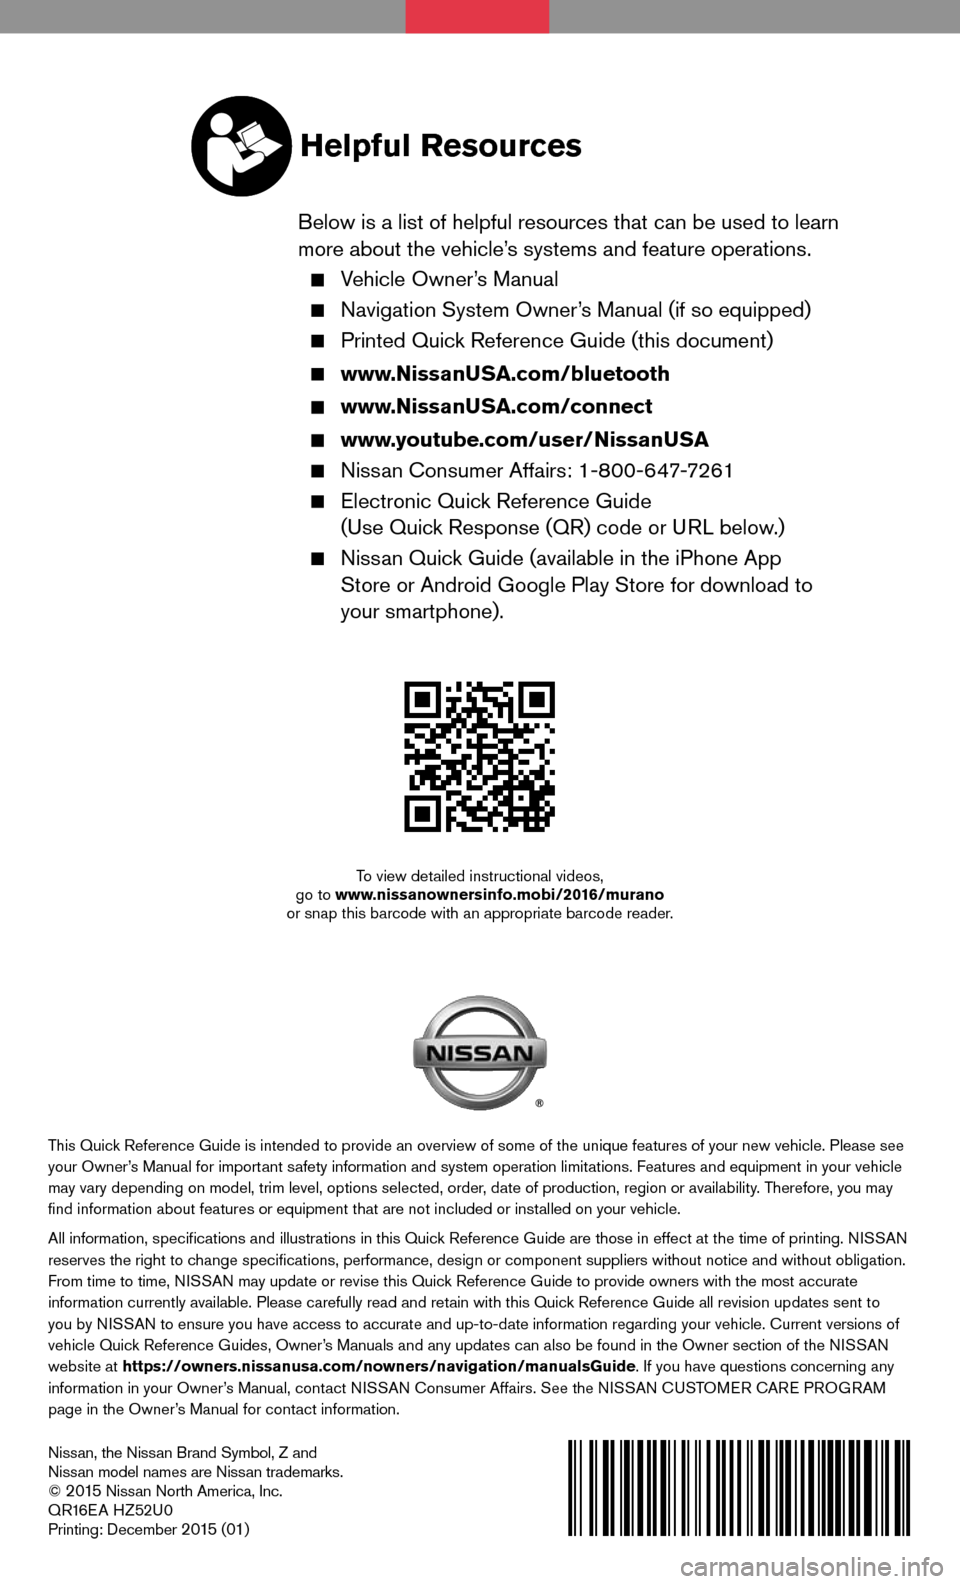 NISSAN MURANO HYBRID 2016 3.G Quick Reference Guide Nissan, the Nissan Brand Symbol, Z and 
Nissan model names are Nissan trademarks.
© 
2 015 Nissan North America, Inc.
QR16EA HZ52U0
Printing: December 
2 015 (01)
To view detailed instructional video